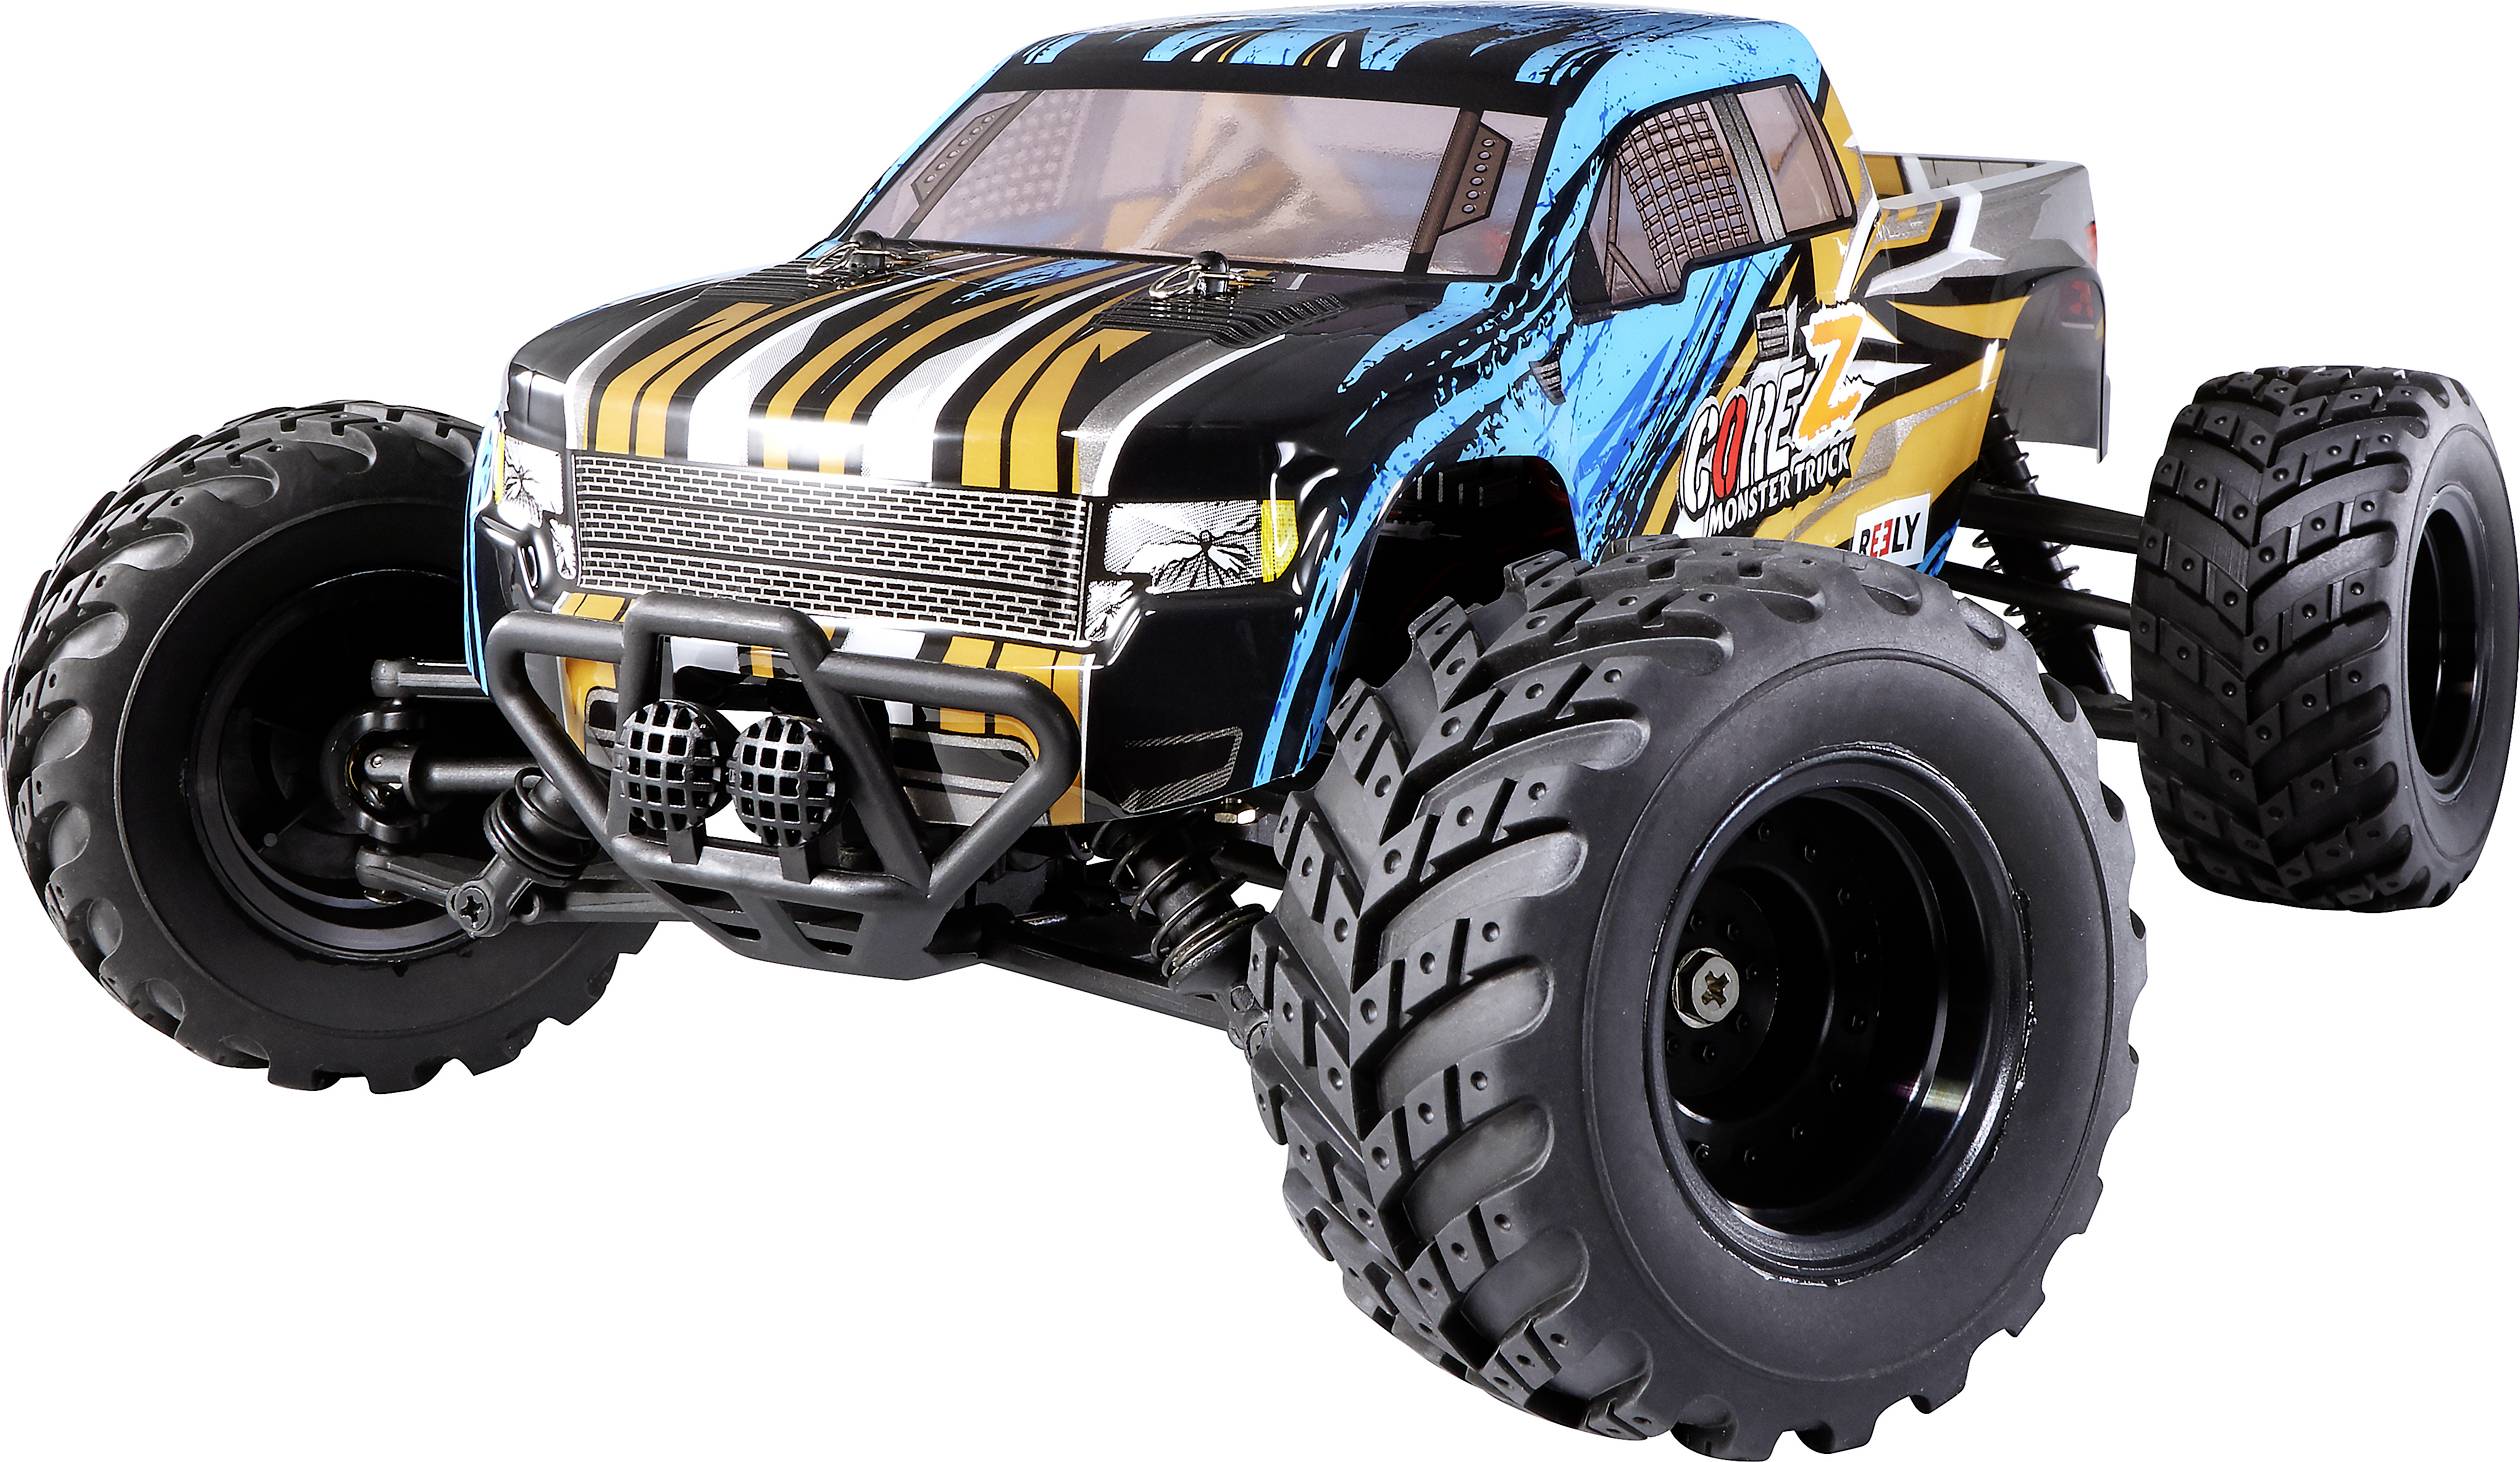 Buy Reely CORE Z Brushed 1:10 XS RC model car for beginners Electric  Monster truck 4WD RtR 2,4 GHz Incl. battery and chargin